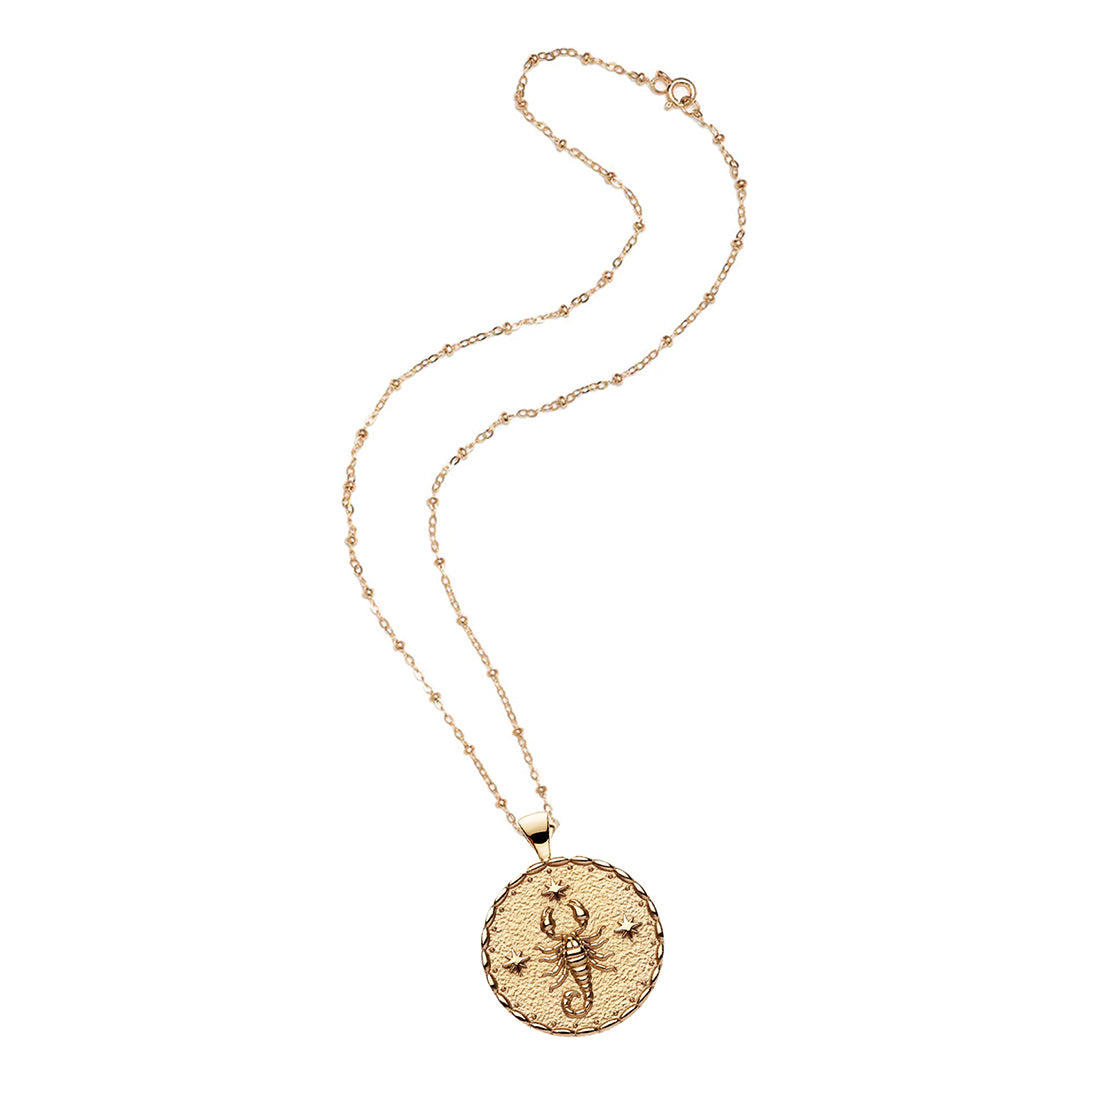 What's Your Sign? Gold over Silver Scorpio Engraved Zodiac Nameplate  Necklace - Walmart.com